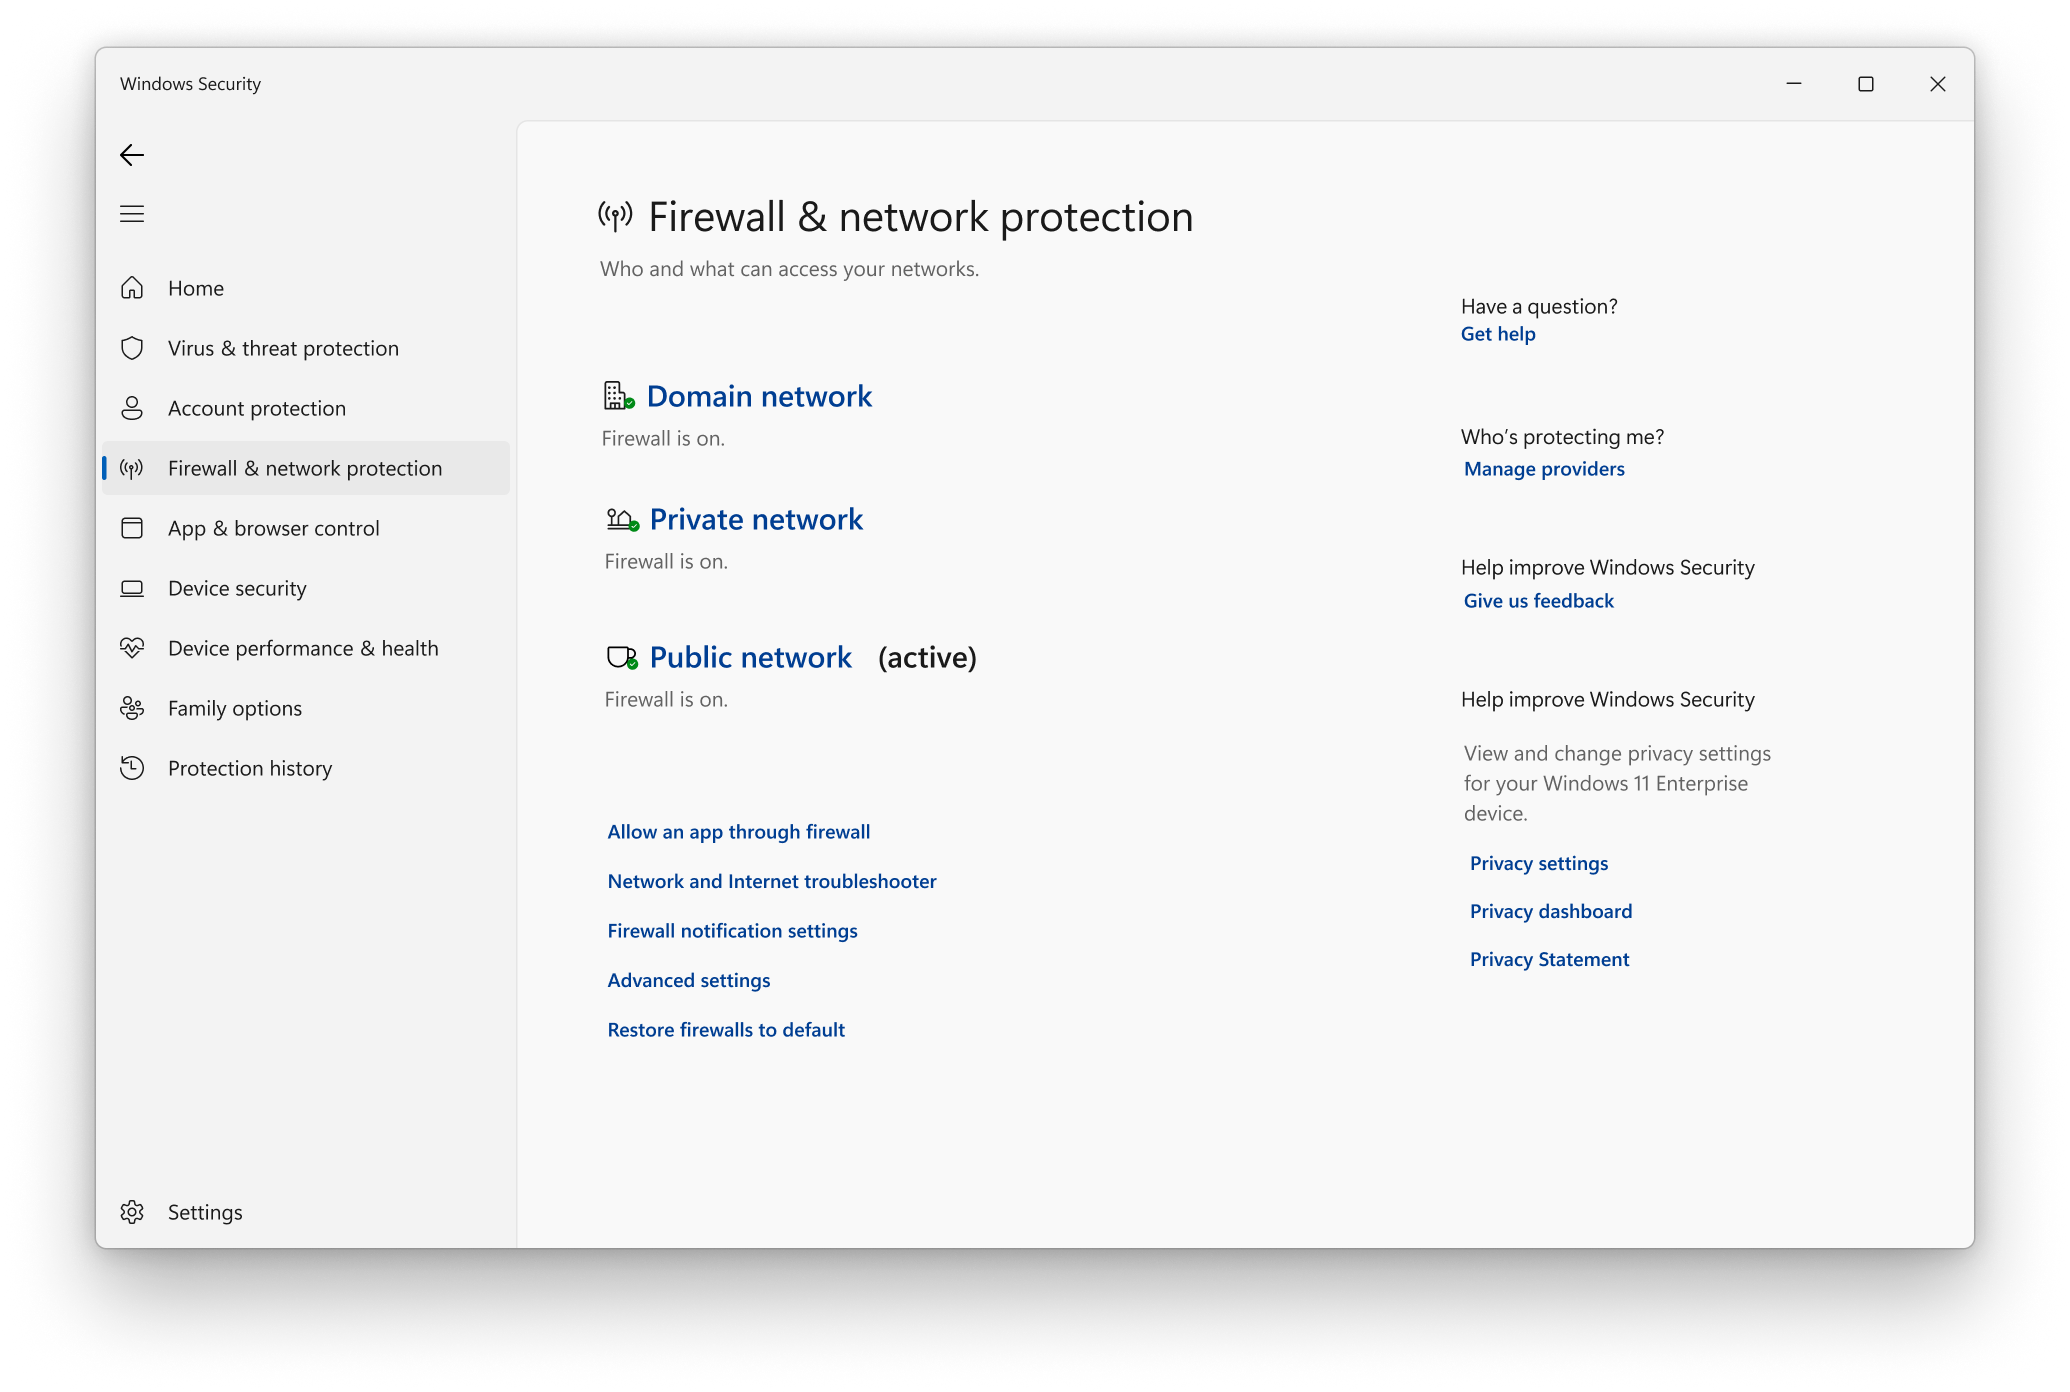 Network settings and firewall configuration